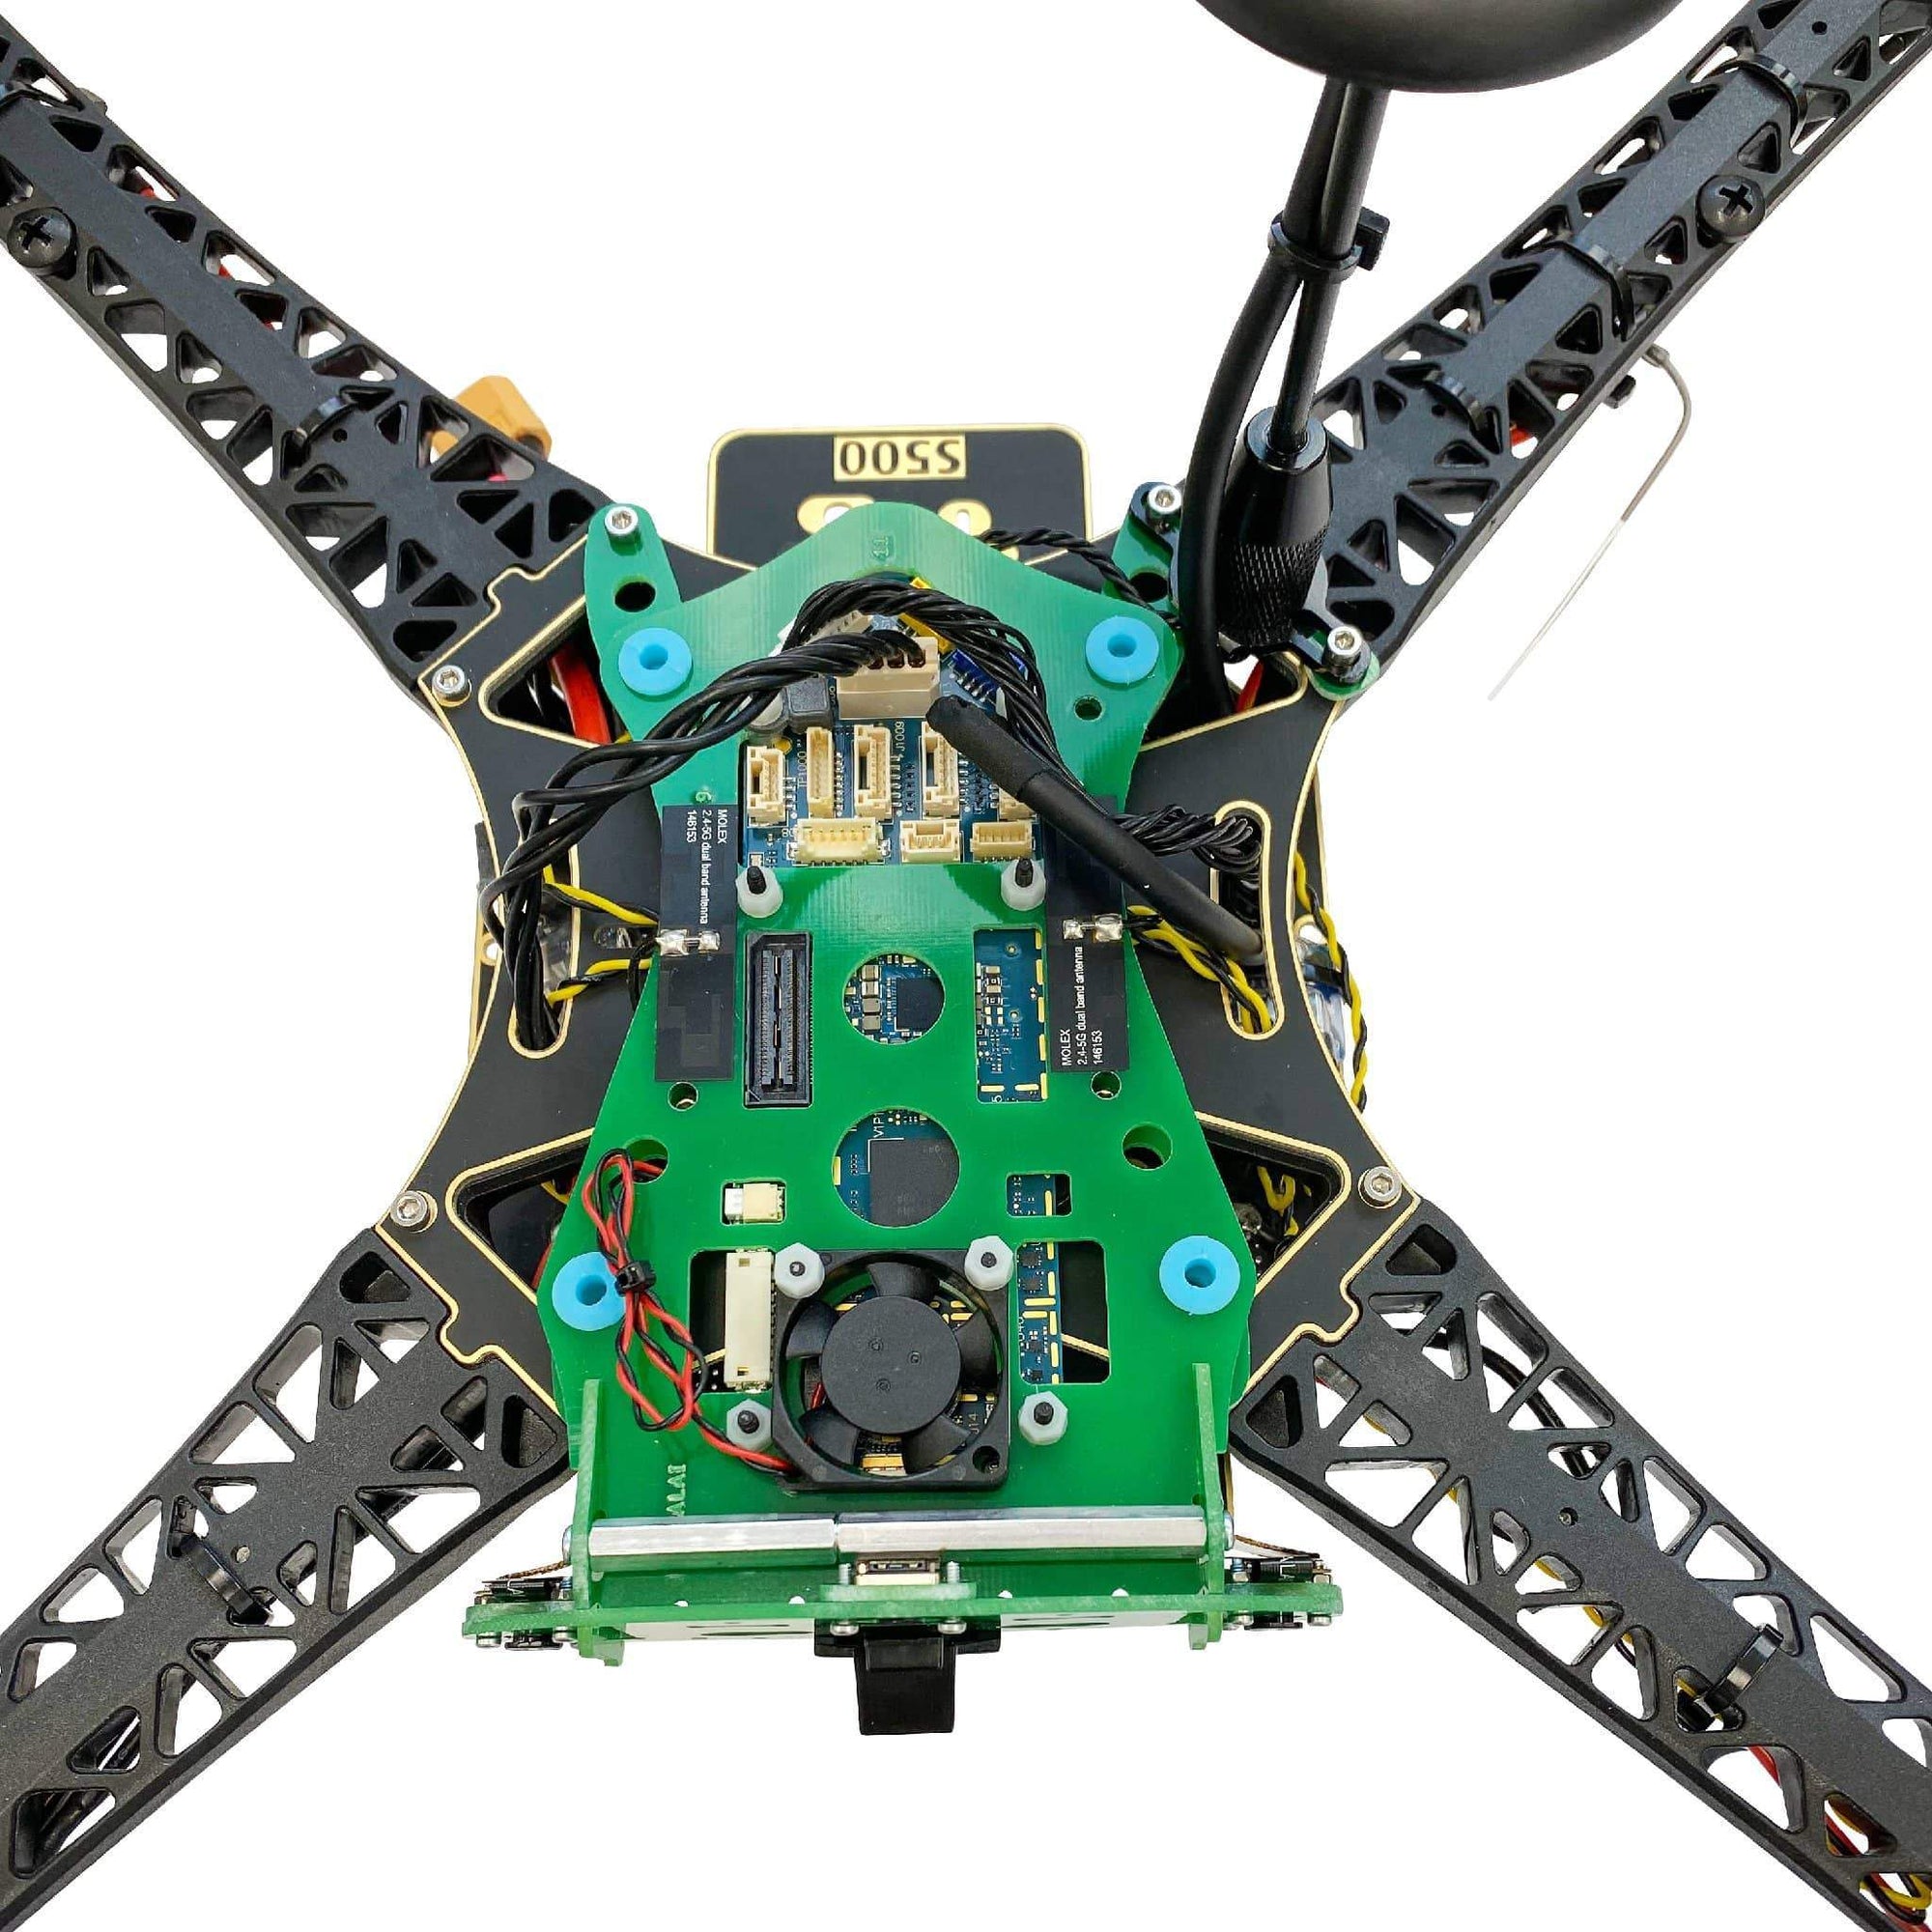 ModalAI, Inc. Dev Kit VOXL Flight Deck - Mount and Fly Autonomously, Assembled Obstacle Avoidance Kit